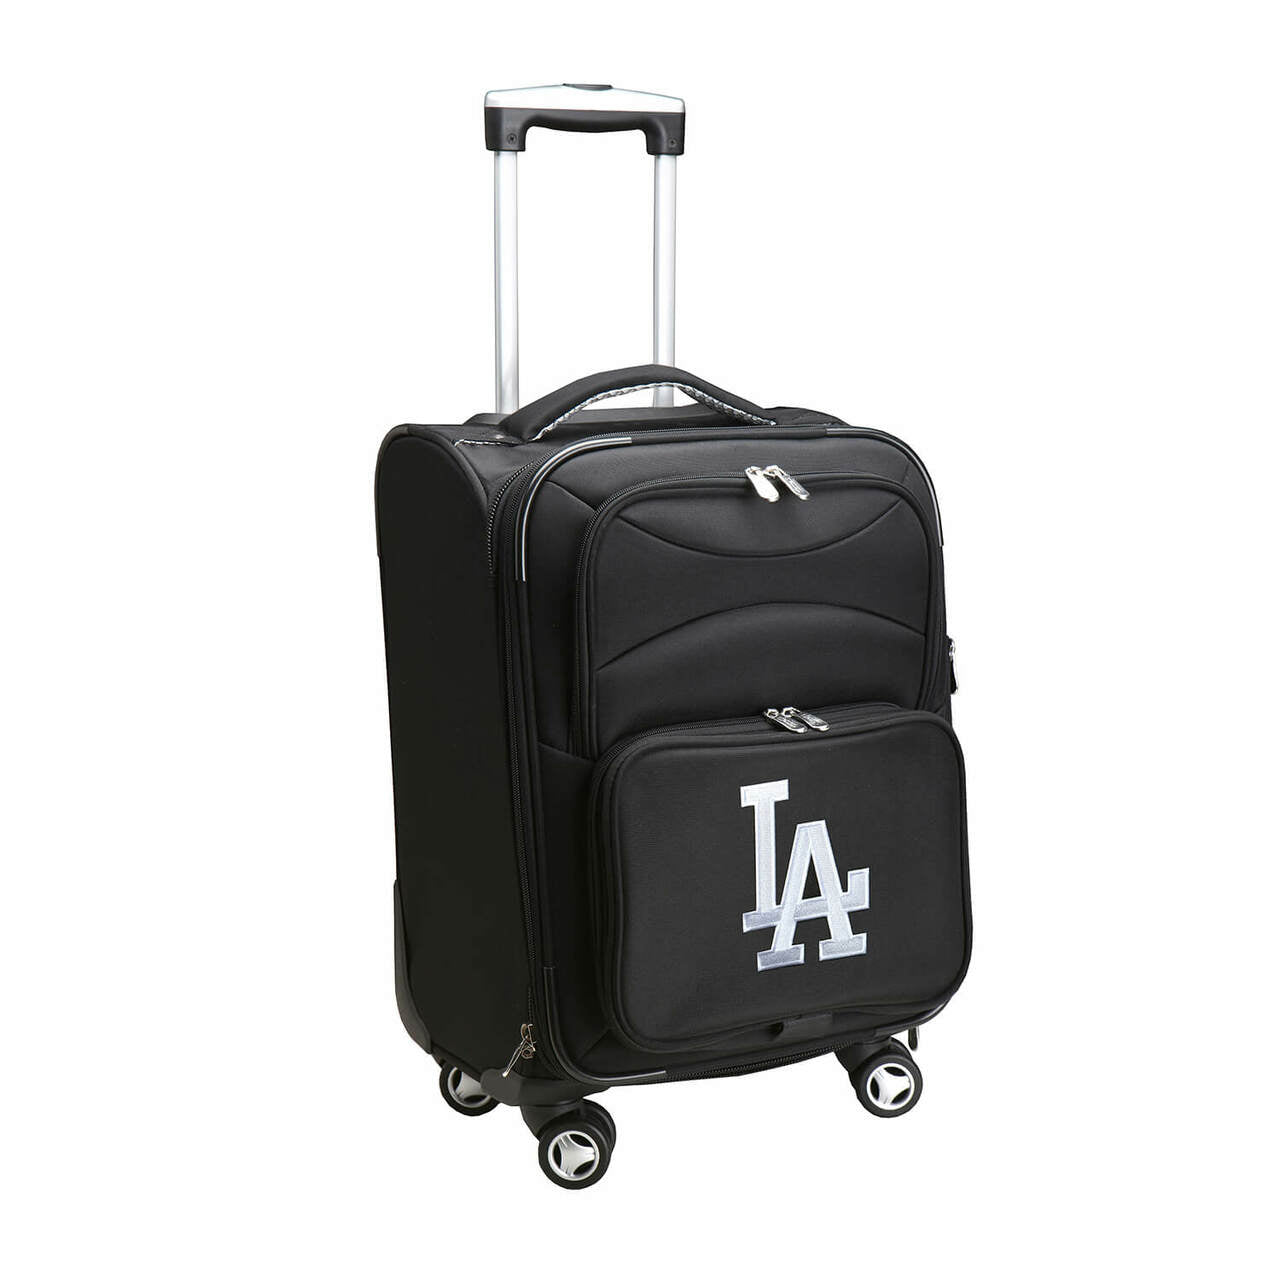 Los Angeles Dodgers 20" Carry-on Spinner Luggage